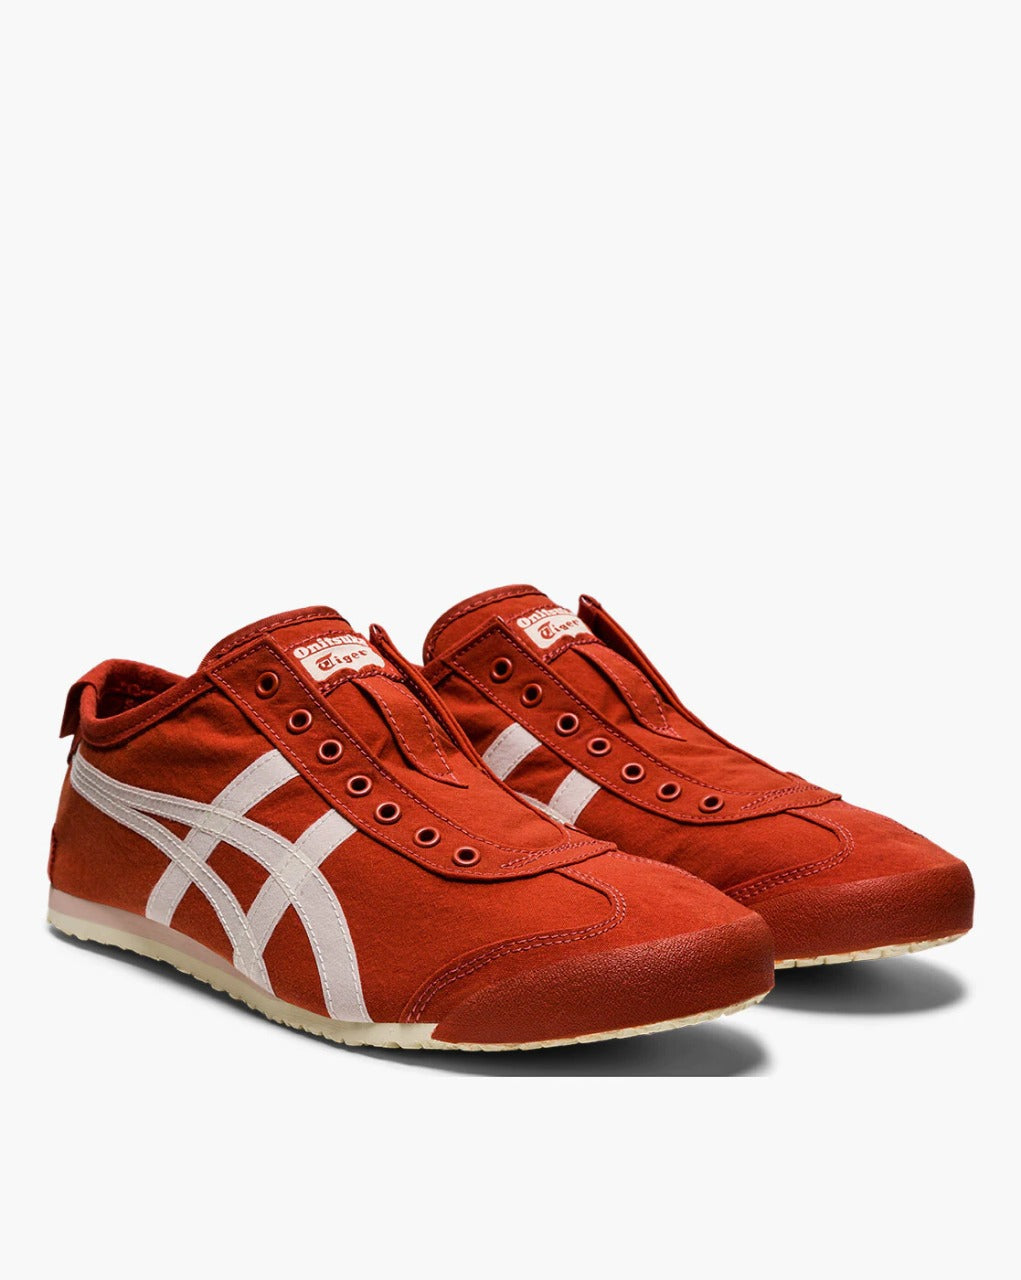 Onitsuka Tiger Red Beige White Mexico 66 Shoes Shoes For Man And Boys HL202-0708